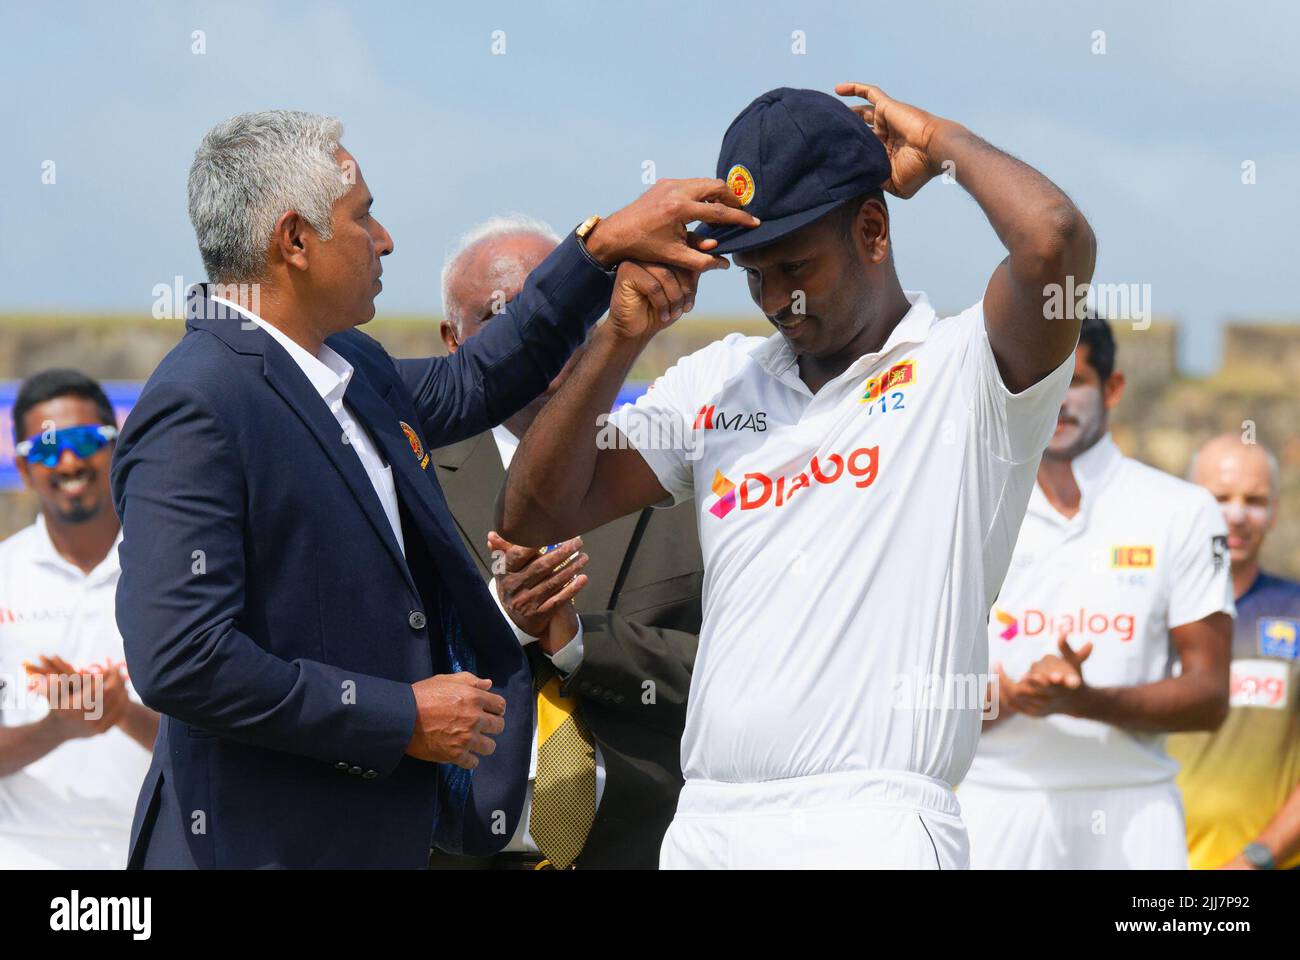 Galle, Sri Lanka. 24th July, 2022. Sri Lanka's Angelo Mathews receives his 100th cap from former Sri Lankan cricketer Chaminda Vaas (L)during the 1st day of the 2nd test cricket match between Sri Lanka vs Pakistan at the Galle International Cricket Stadium in Galle on 24th July, 2022. Viraj Kothalwala/Alamy Live News Stock Photo